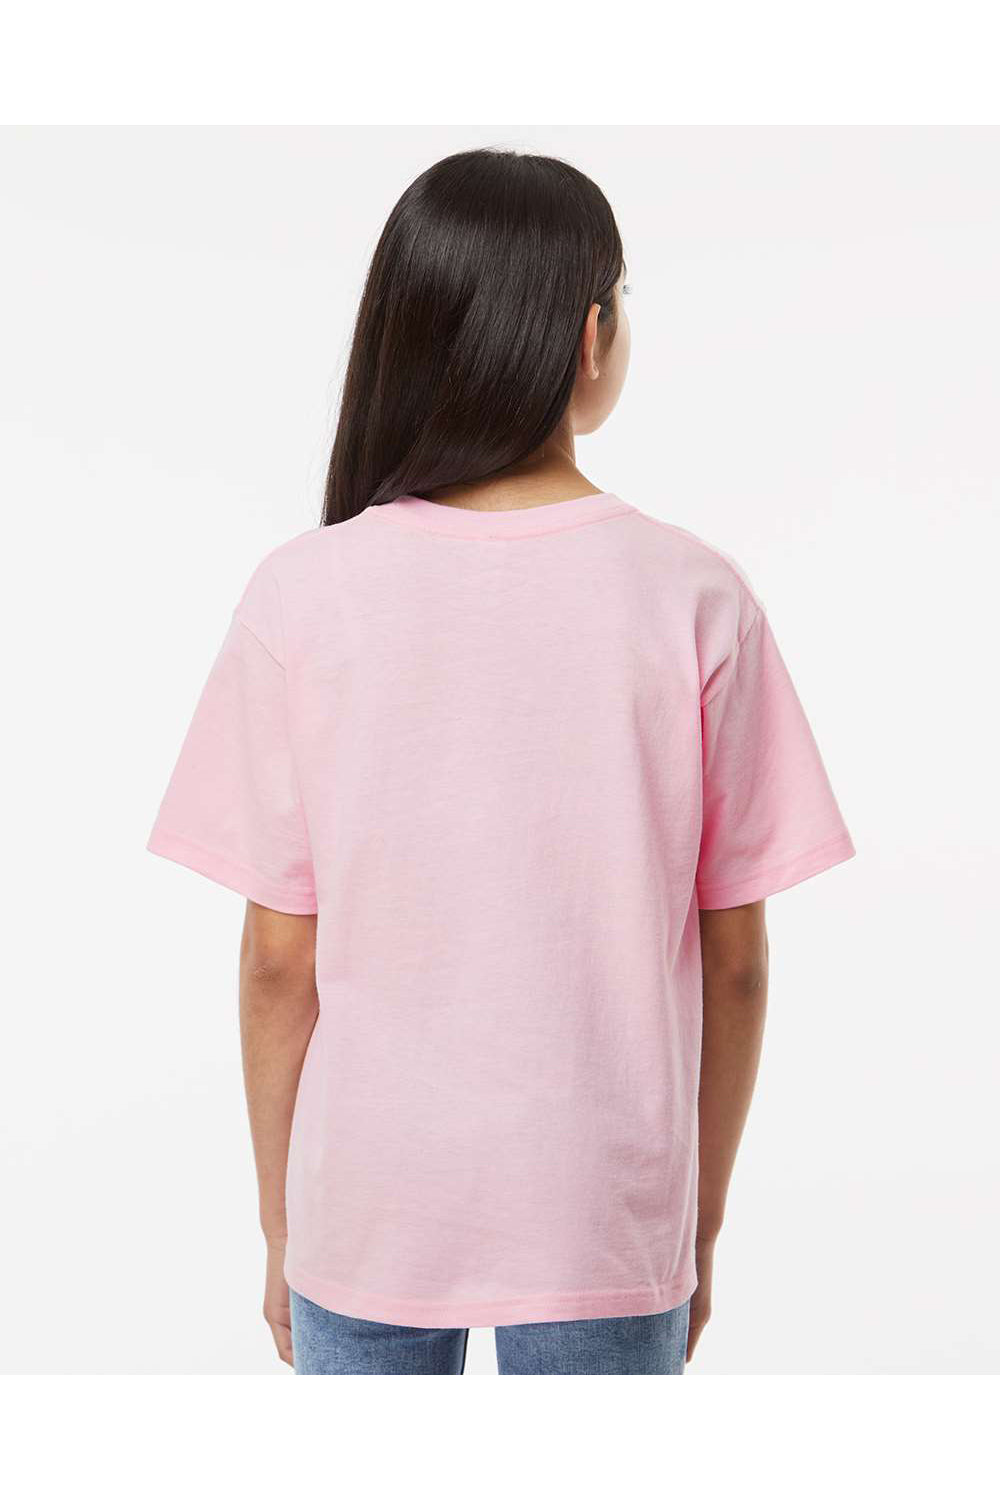 M&O 4850 Youth Gold Soft Touch Short Sleeve Crewneck T-Shirt Light Pink Model Back